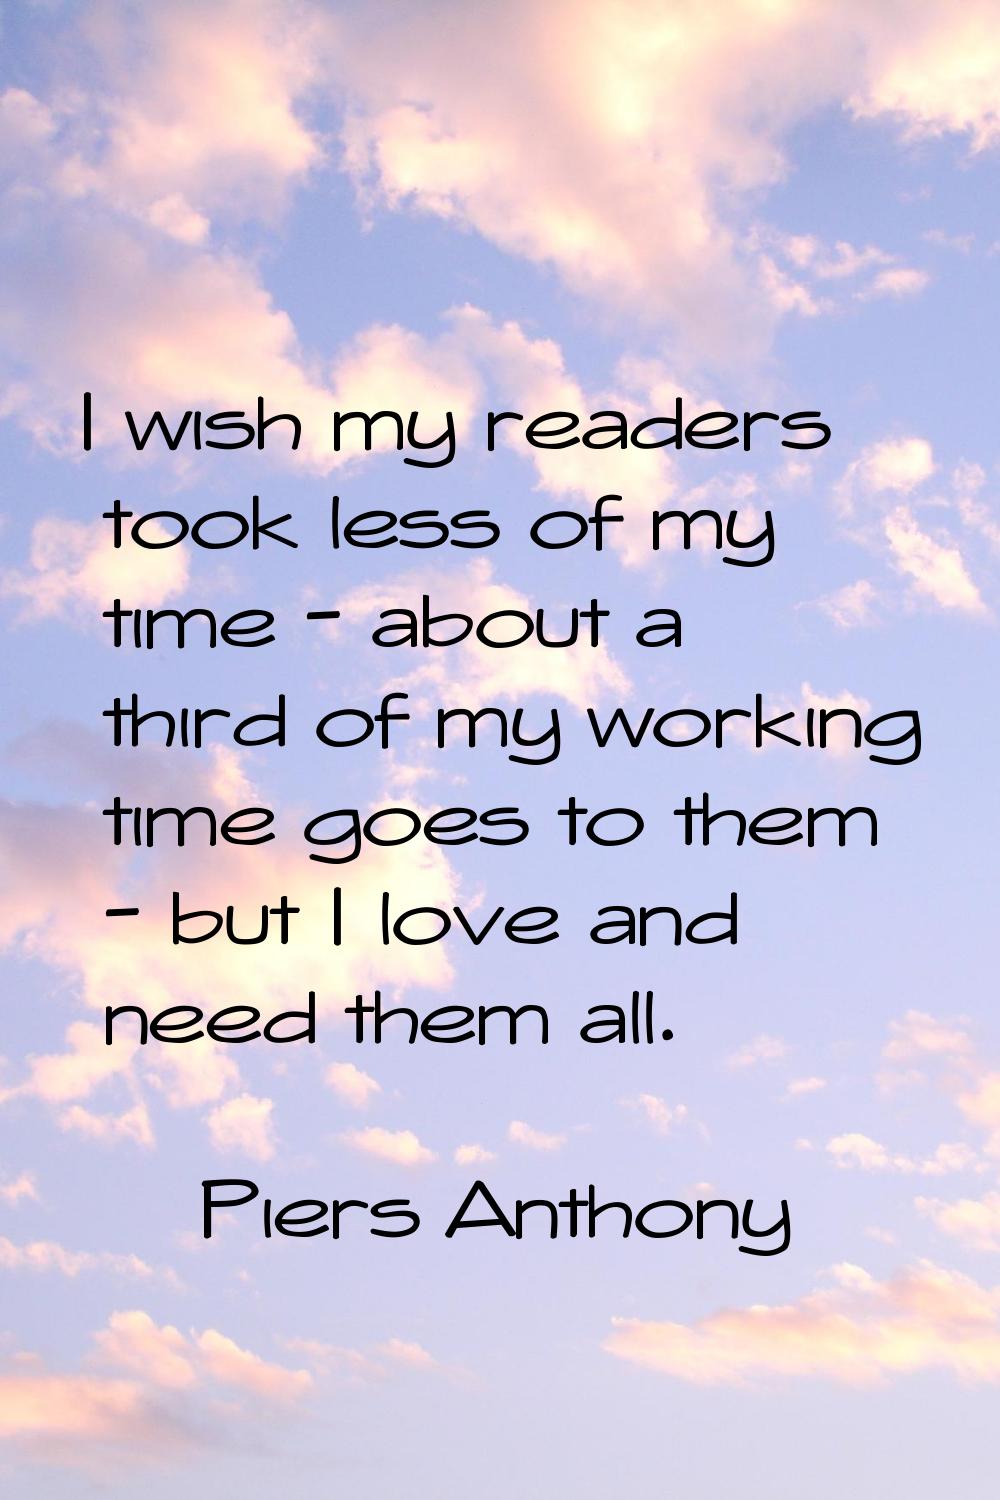 I wish my readers took less of my time - about a third of my working time goes to them - but I love